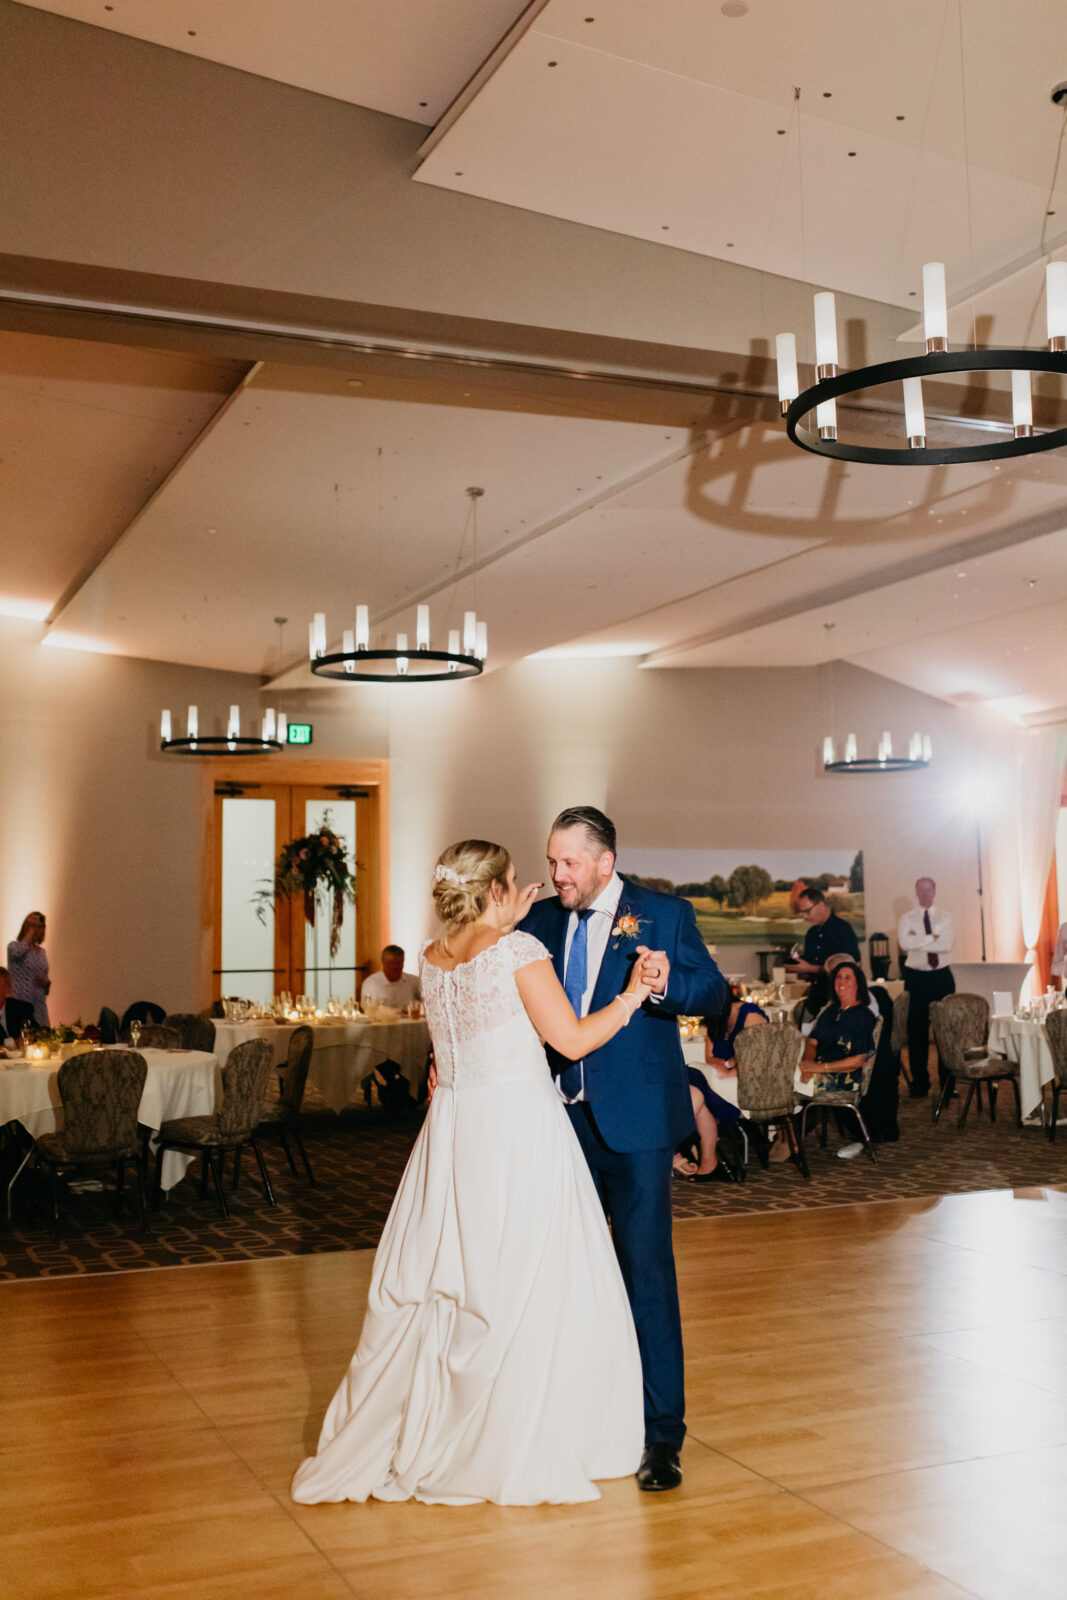 A lovely photo of the newlyweds' first dance as a married couple